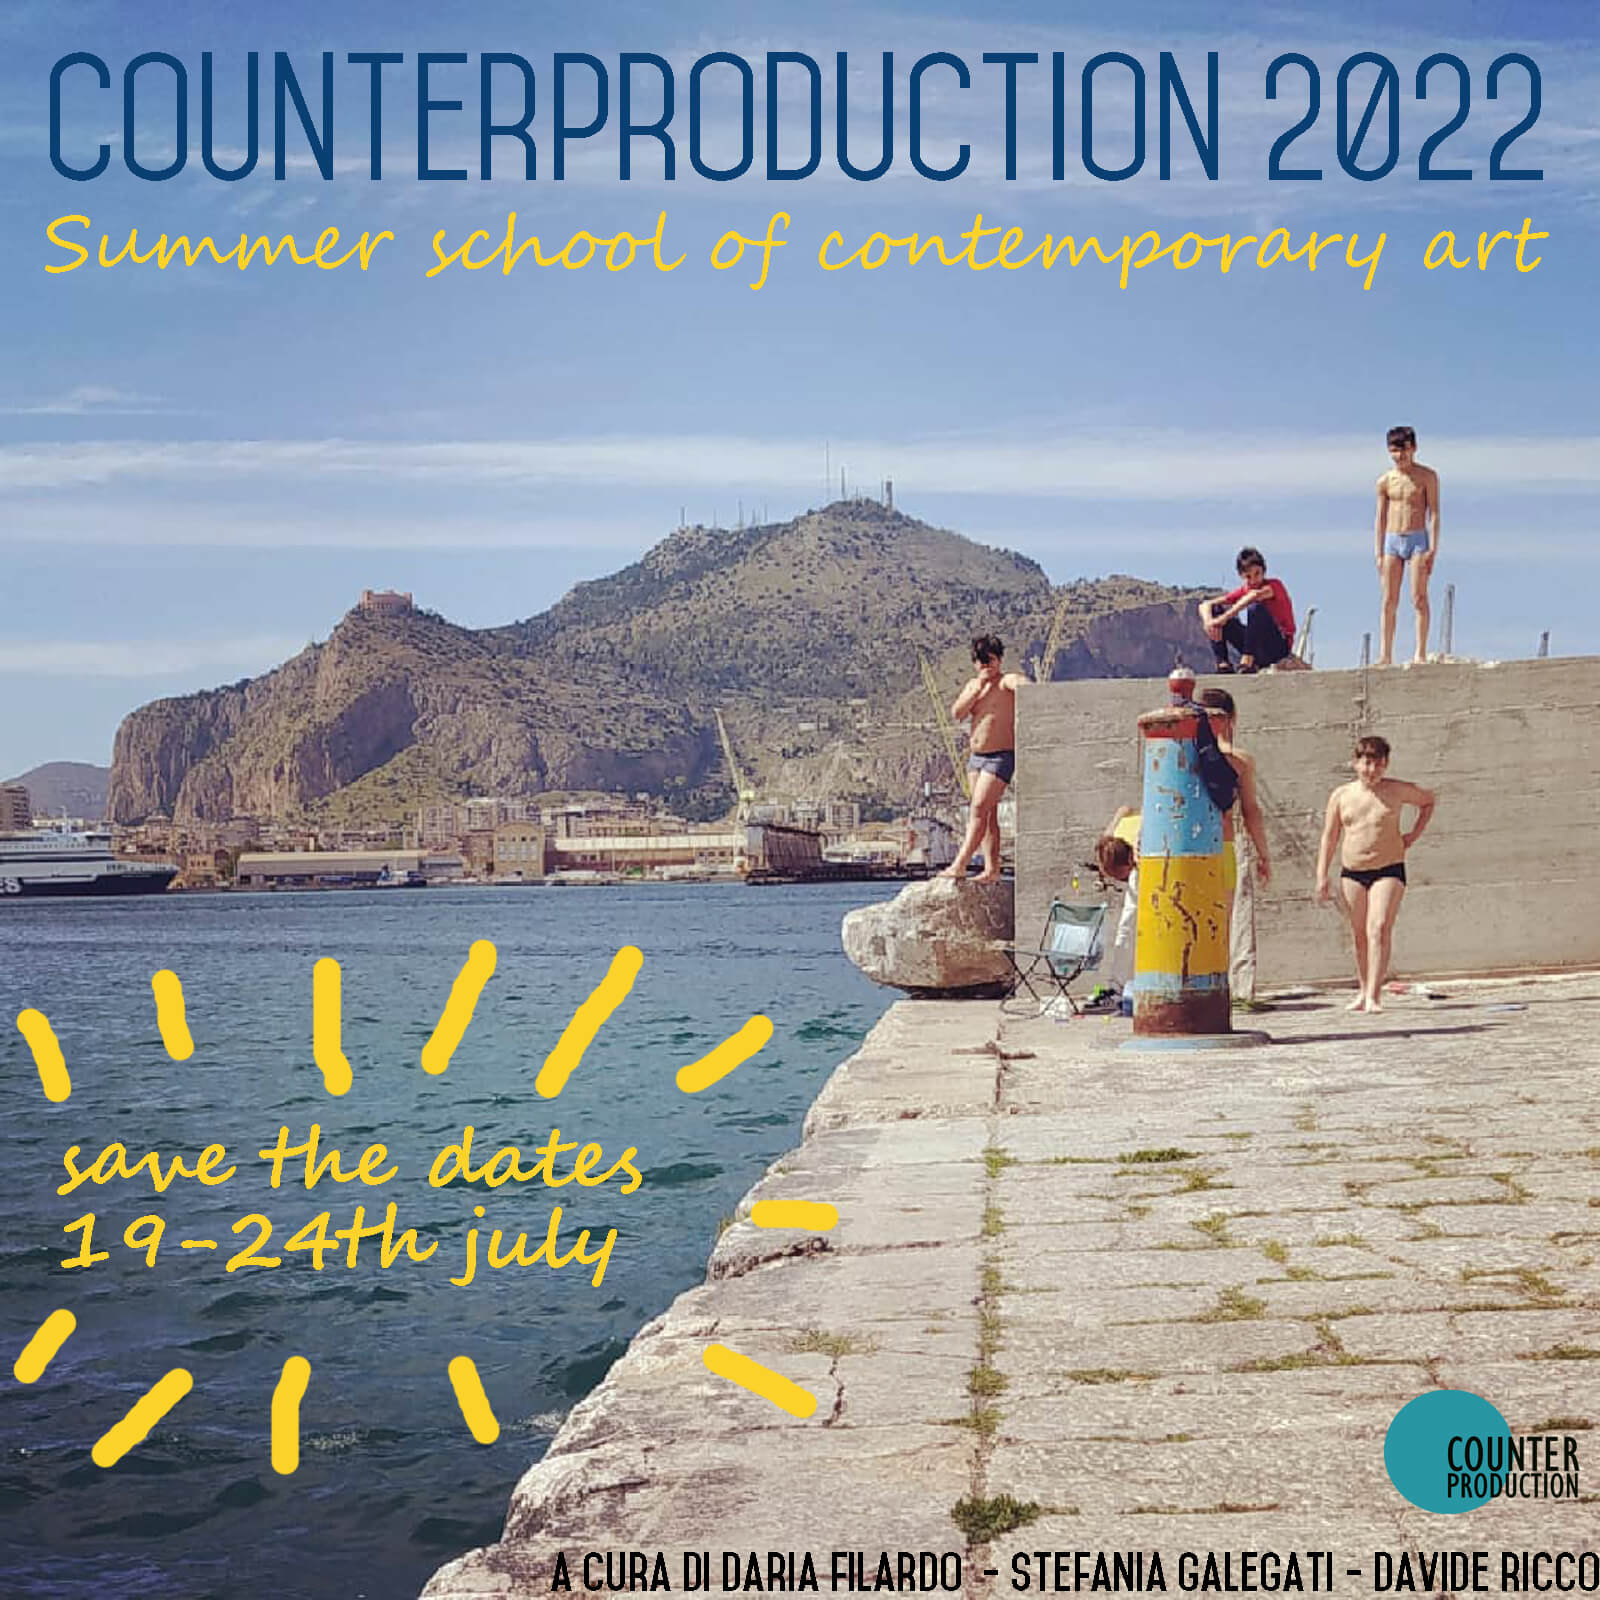 Counter/Production2022 Open Call